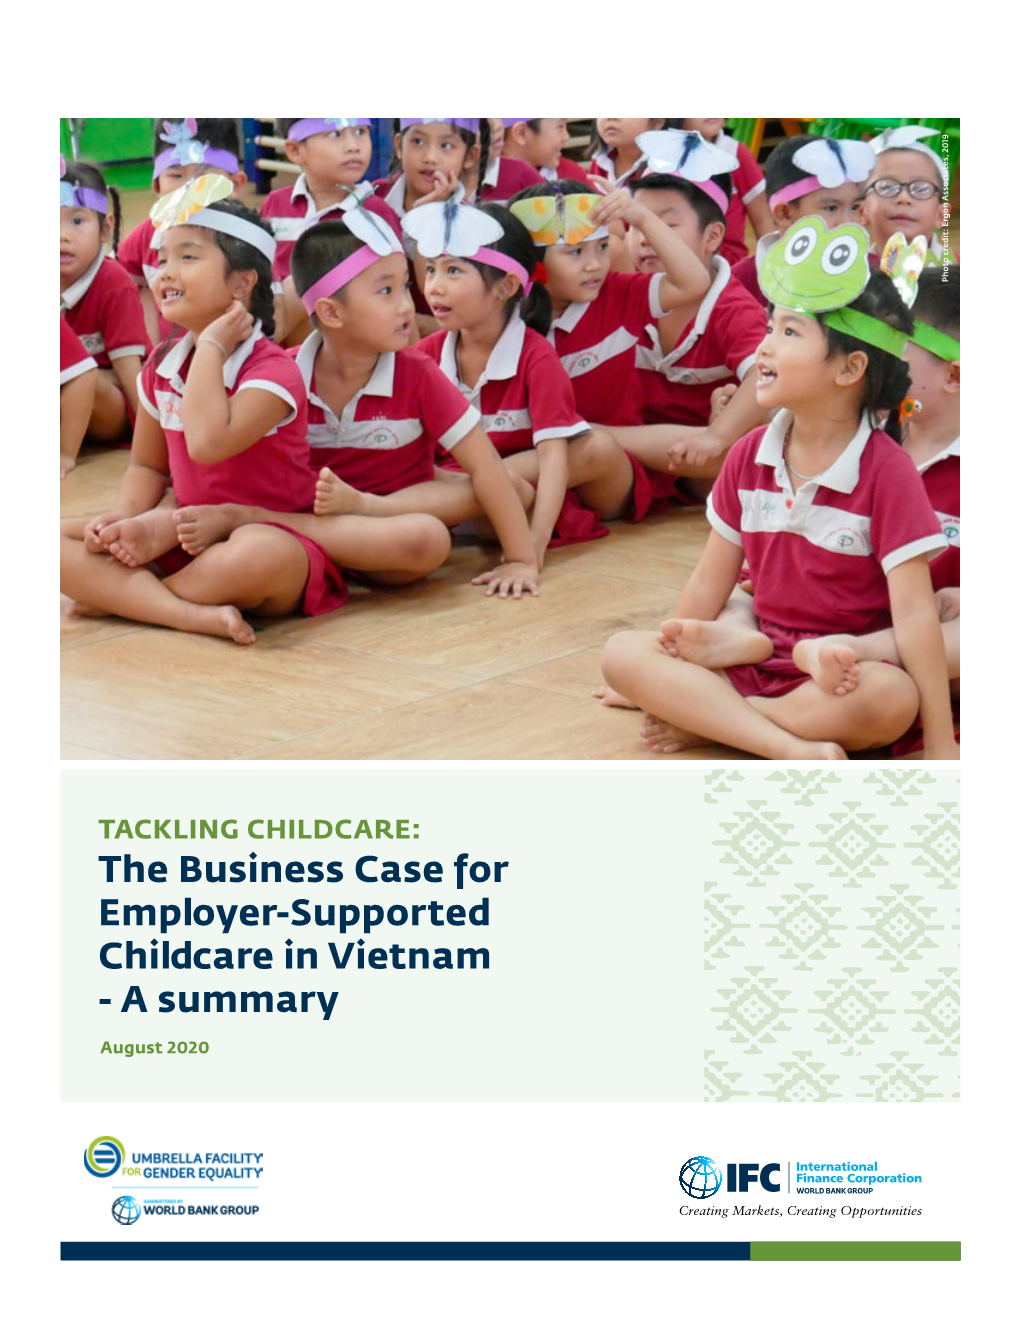 The Business Case for Employer-Supported Childcare in Vietnam - a Summary